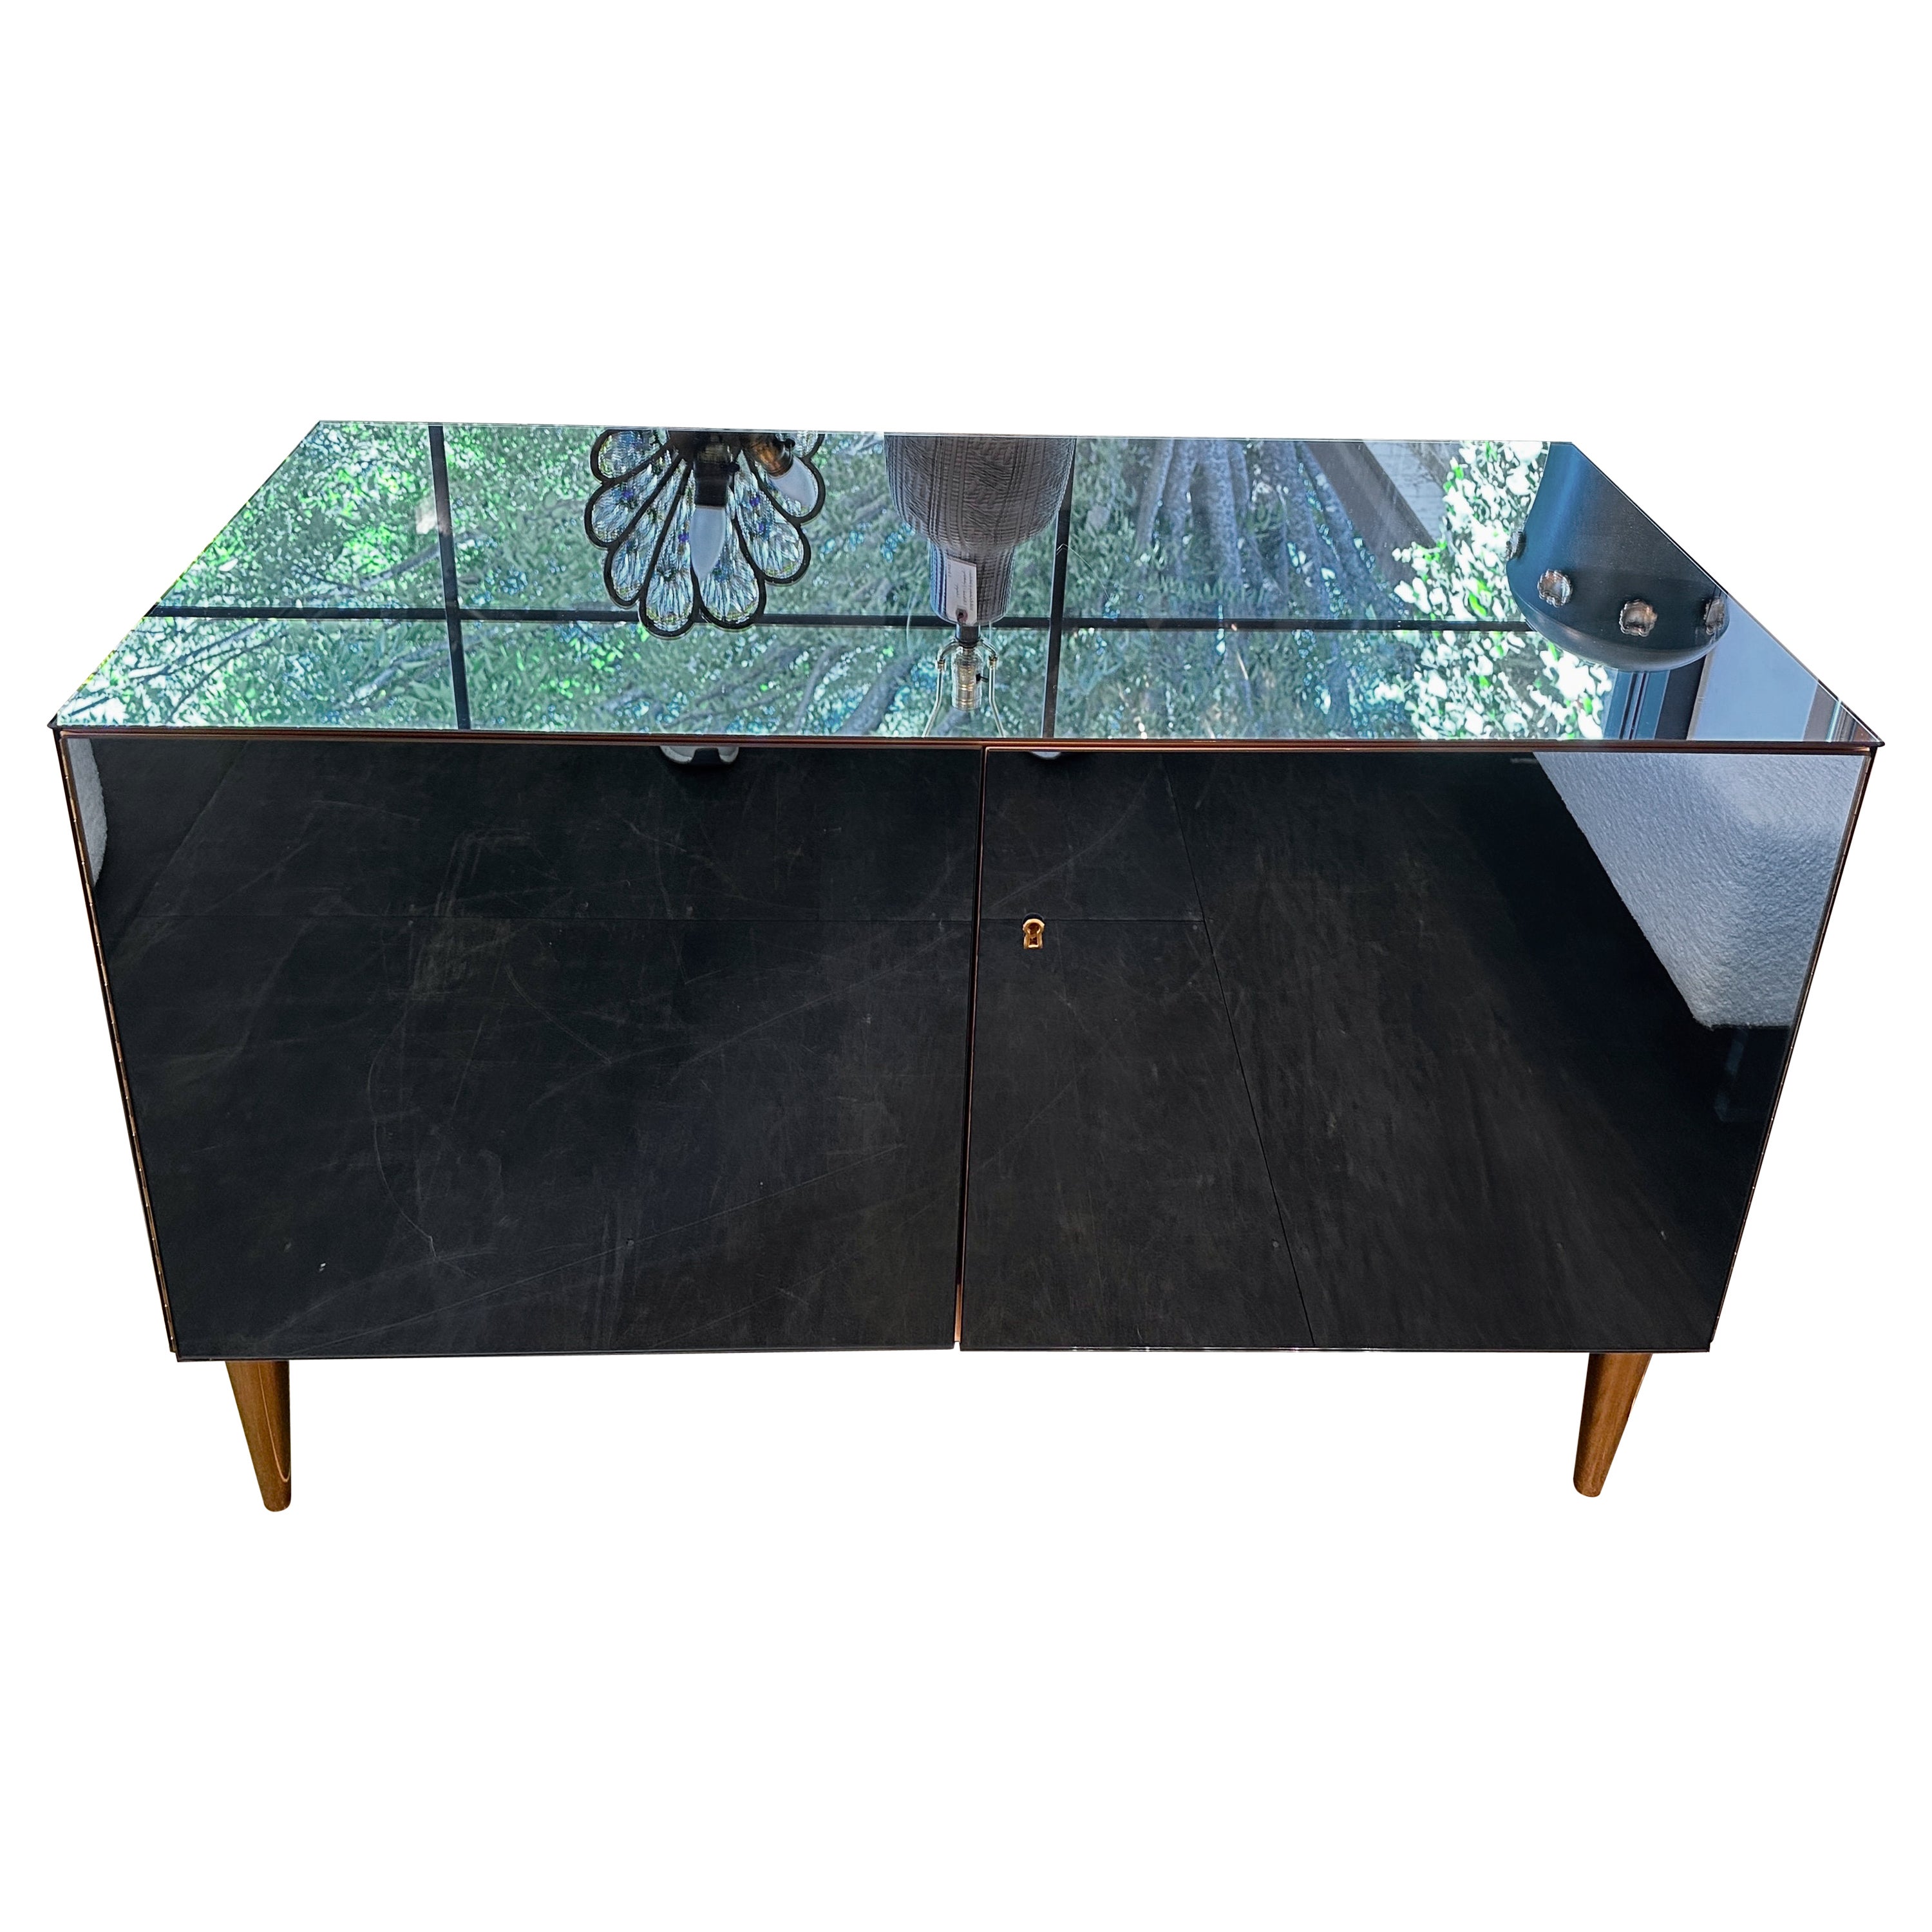 EFFETTO VETRO Italian Blue Tinted Mirror Cabinet (Two Available)